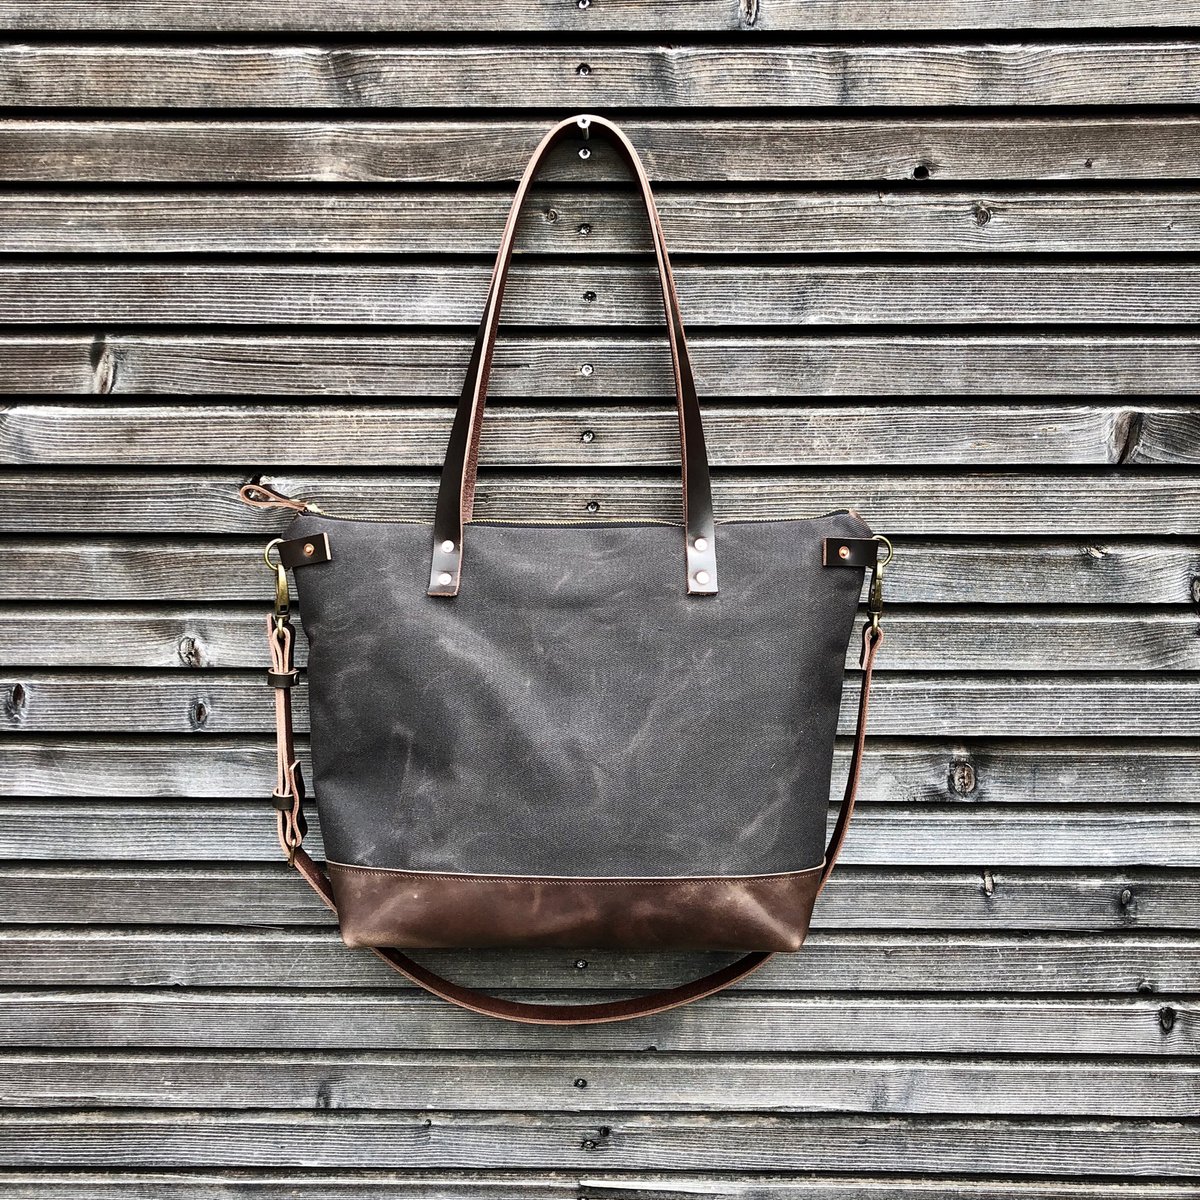 Canvas leather tote bag / carry all / diaper bag with leather handles and leather bottom ...